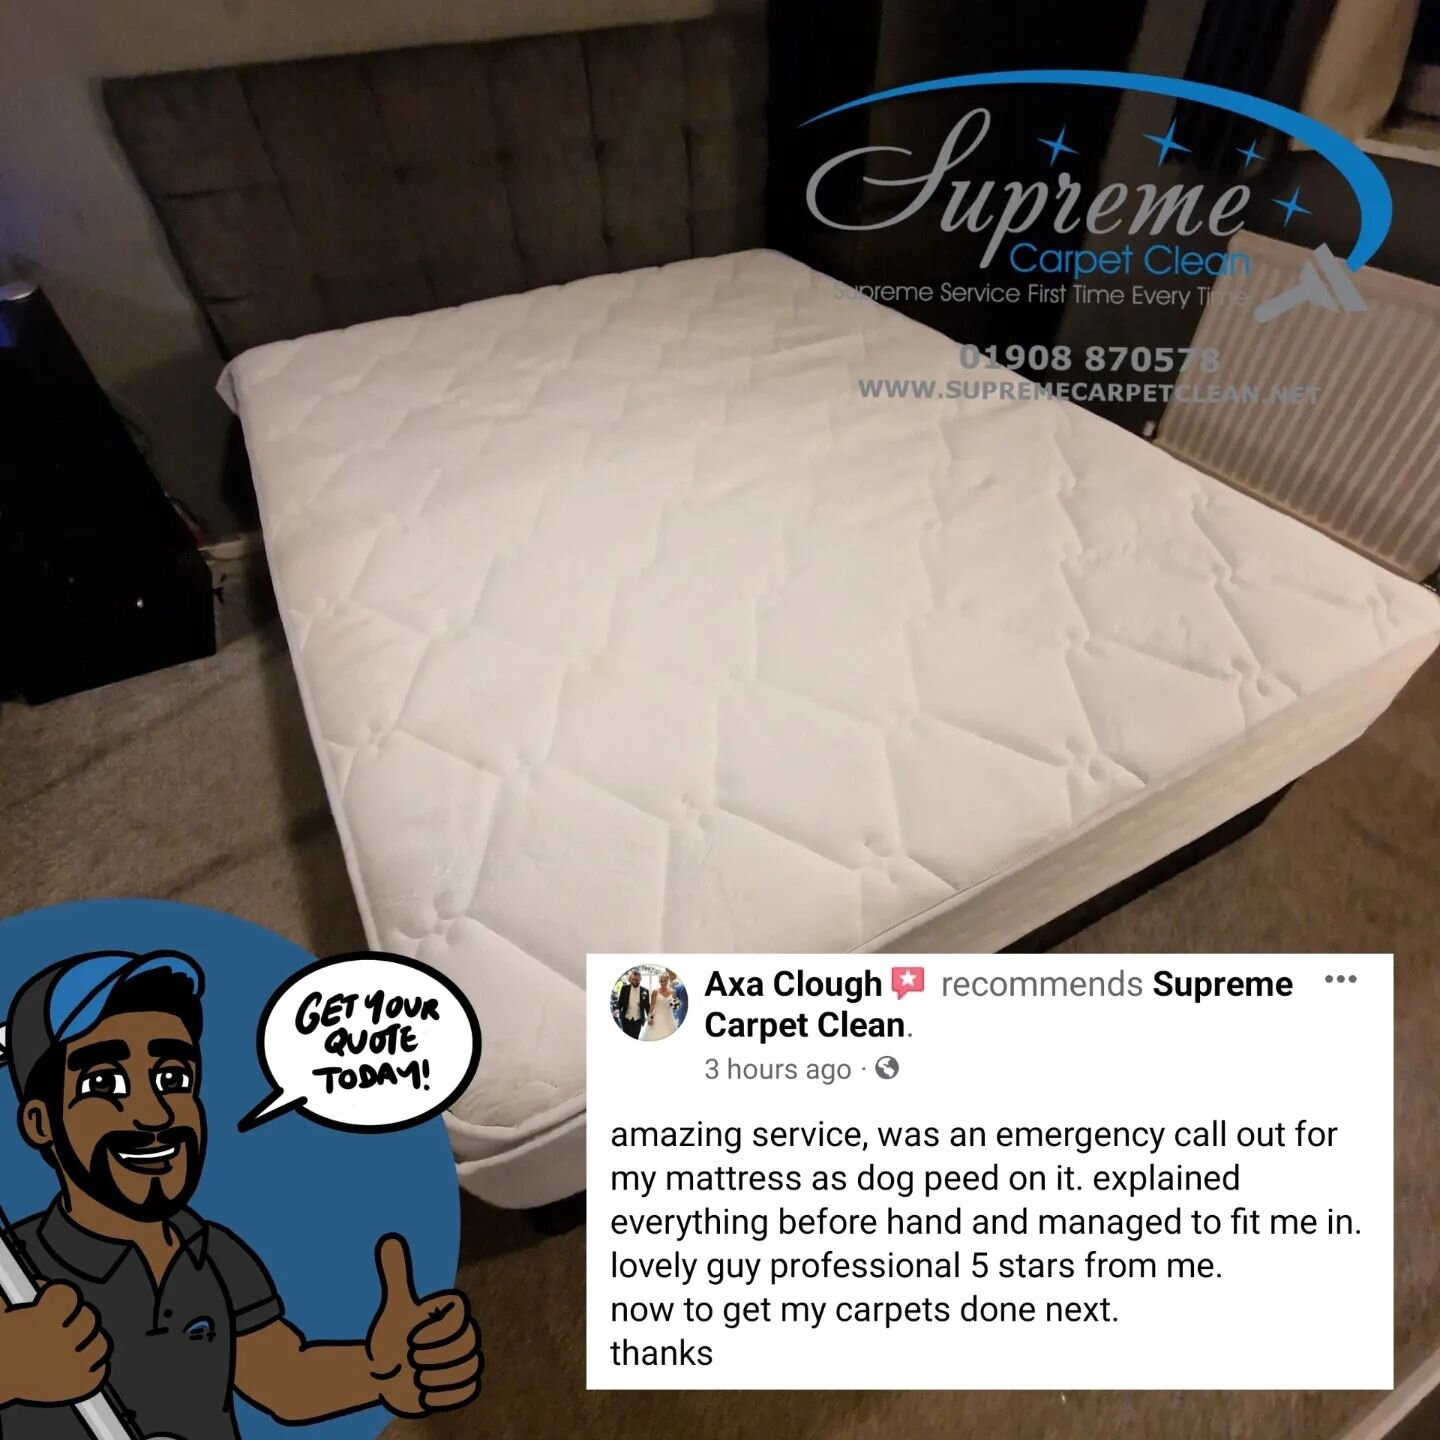 Happy customer - A recent mattress clean completed by Supreme carpet clean.

FREE QUOTES AVAILABLE - WE COVER NATIONWIDE
.
.
.
.
.
.
.
.

#mattresscleanmiltonkeynes #Supremecarpetclean #mattresscleaning #dogurine #mattresscleaningmiltonkeynes #mattre